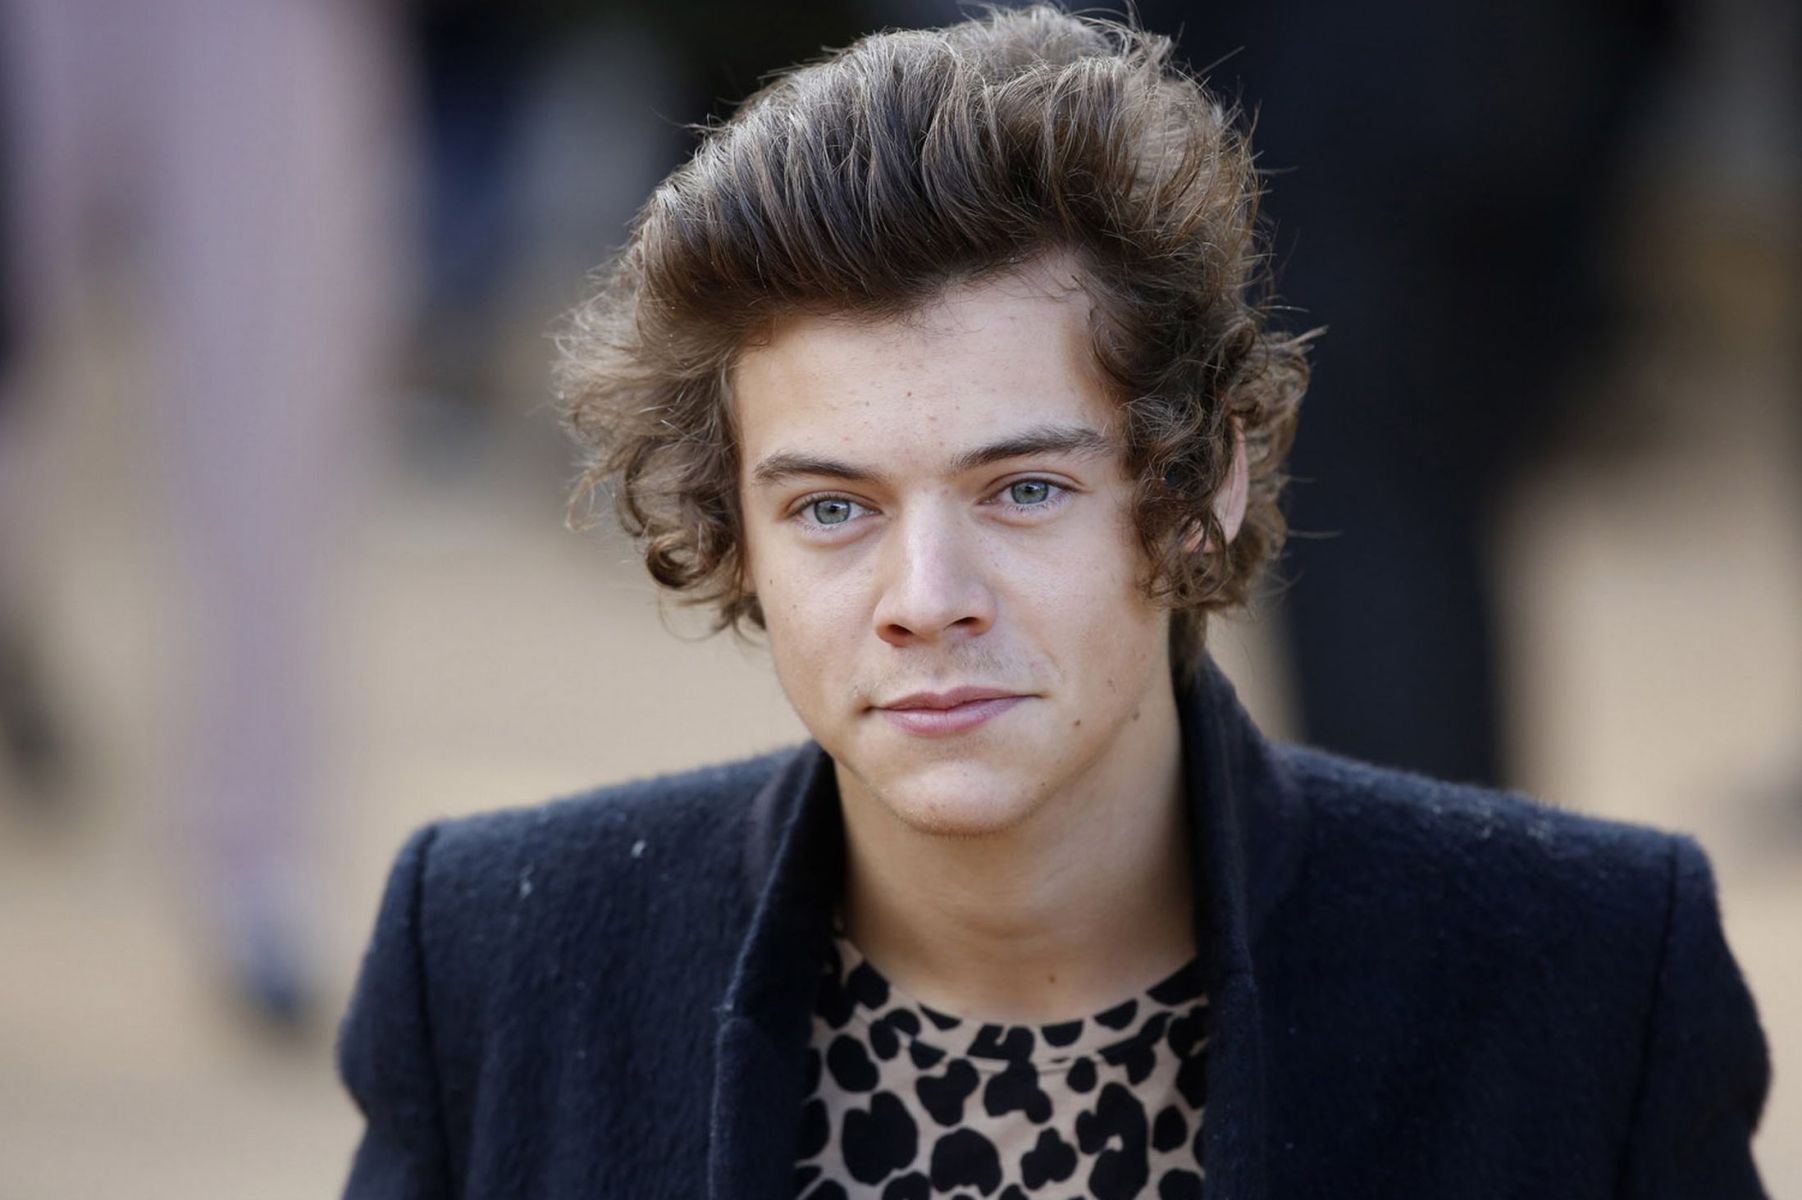 Free Harry Styles Wallpaper - Tongue Twisters British Council , HD Wallpaper & Backgrounds